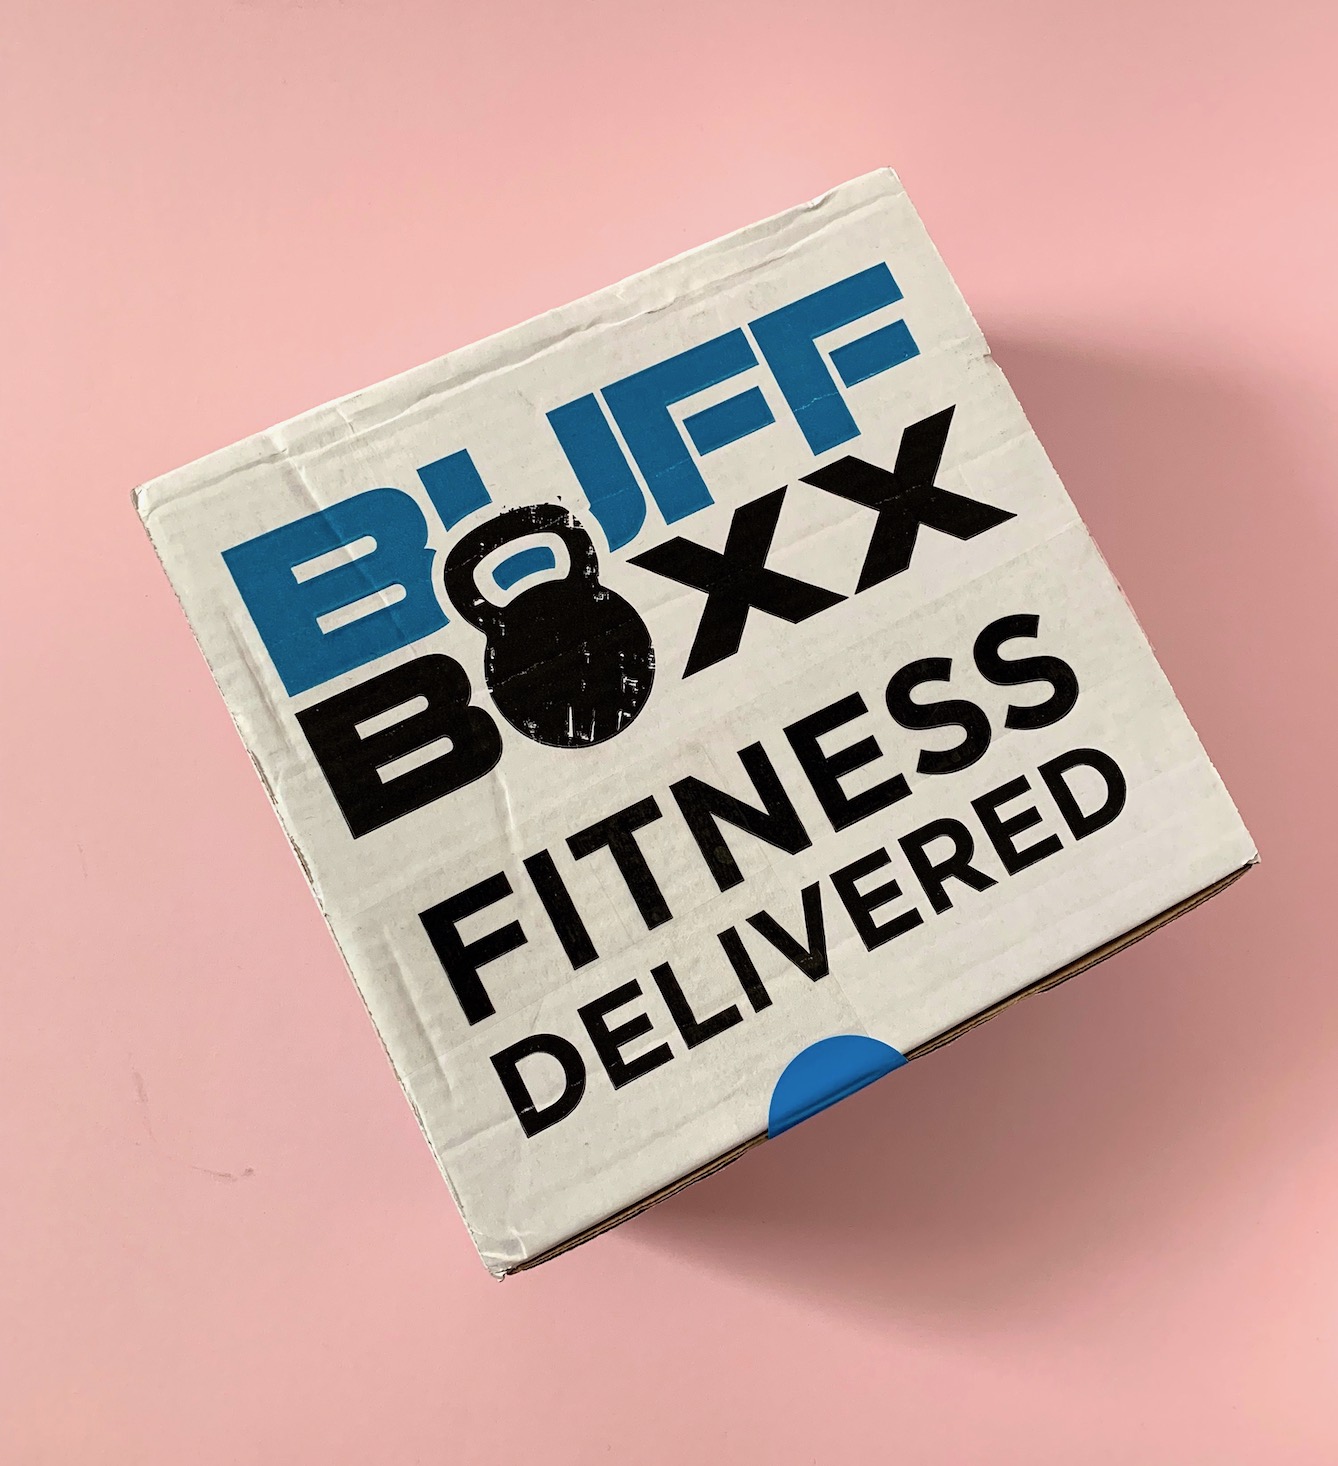 BuffBoxx Fitness Subscription Review + Coupon – November 2018